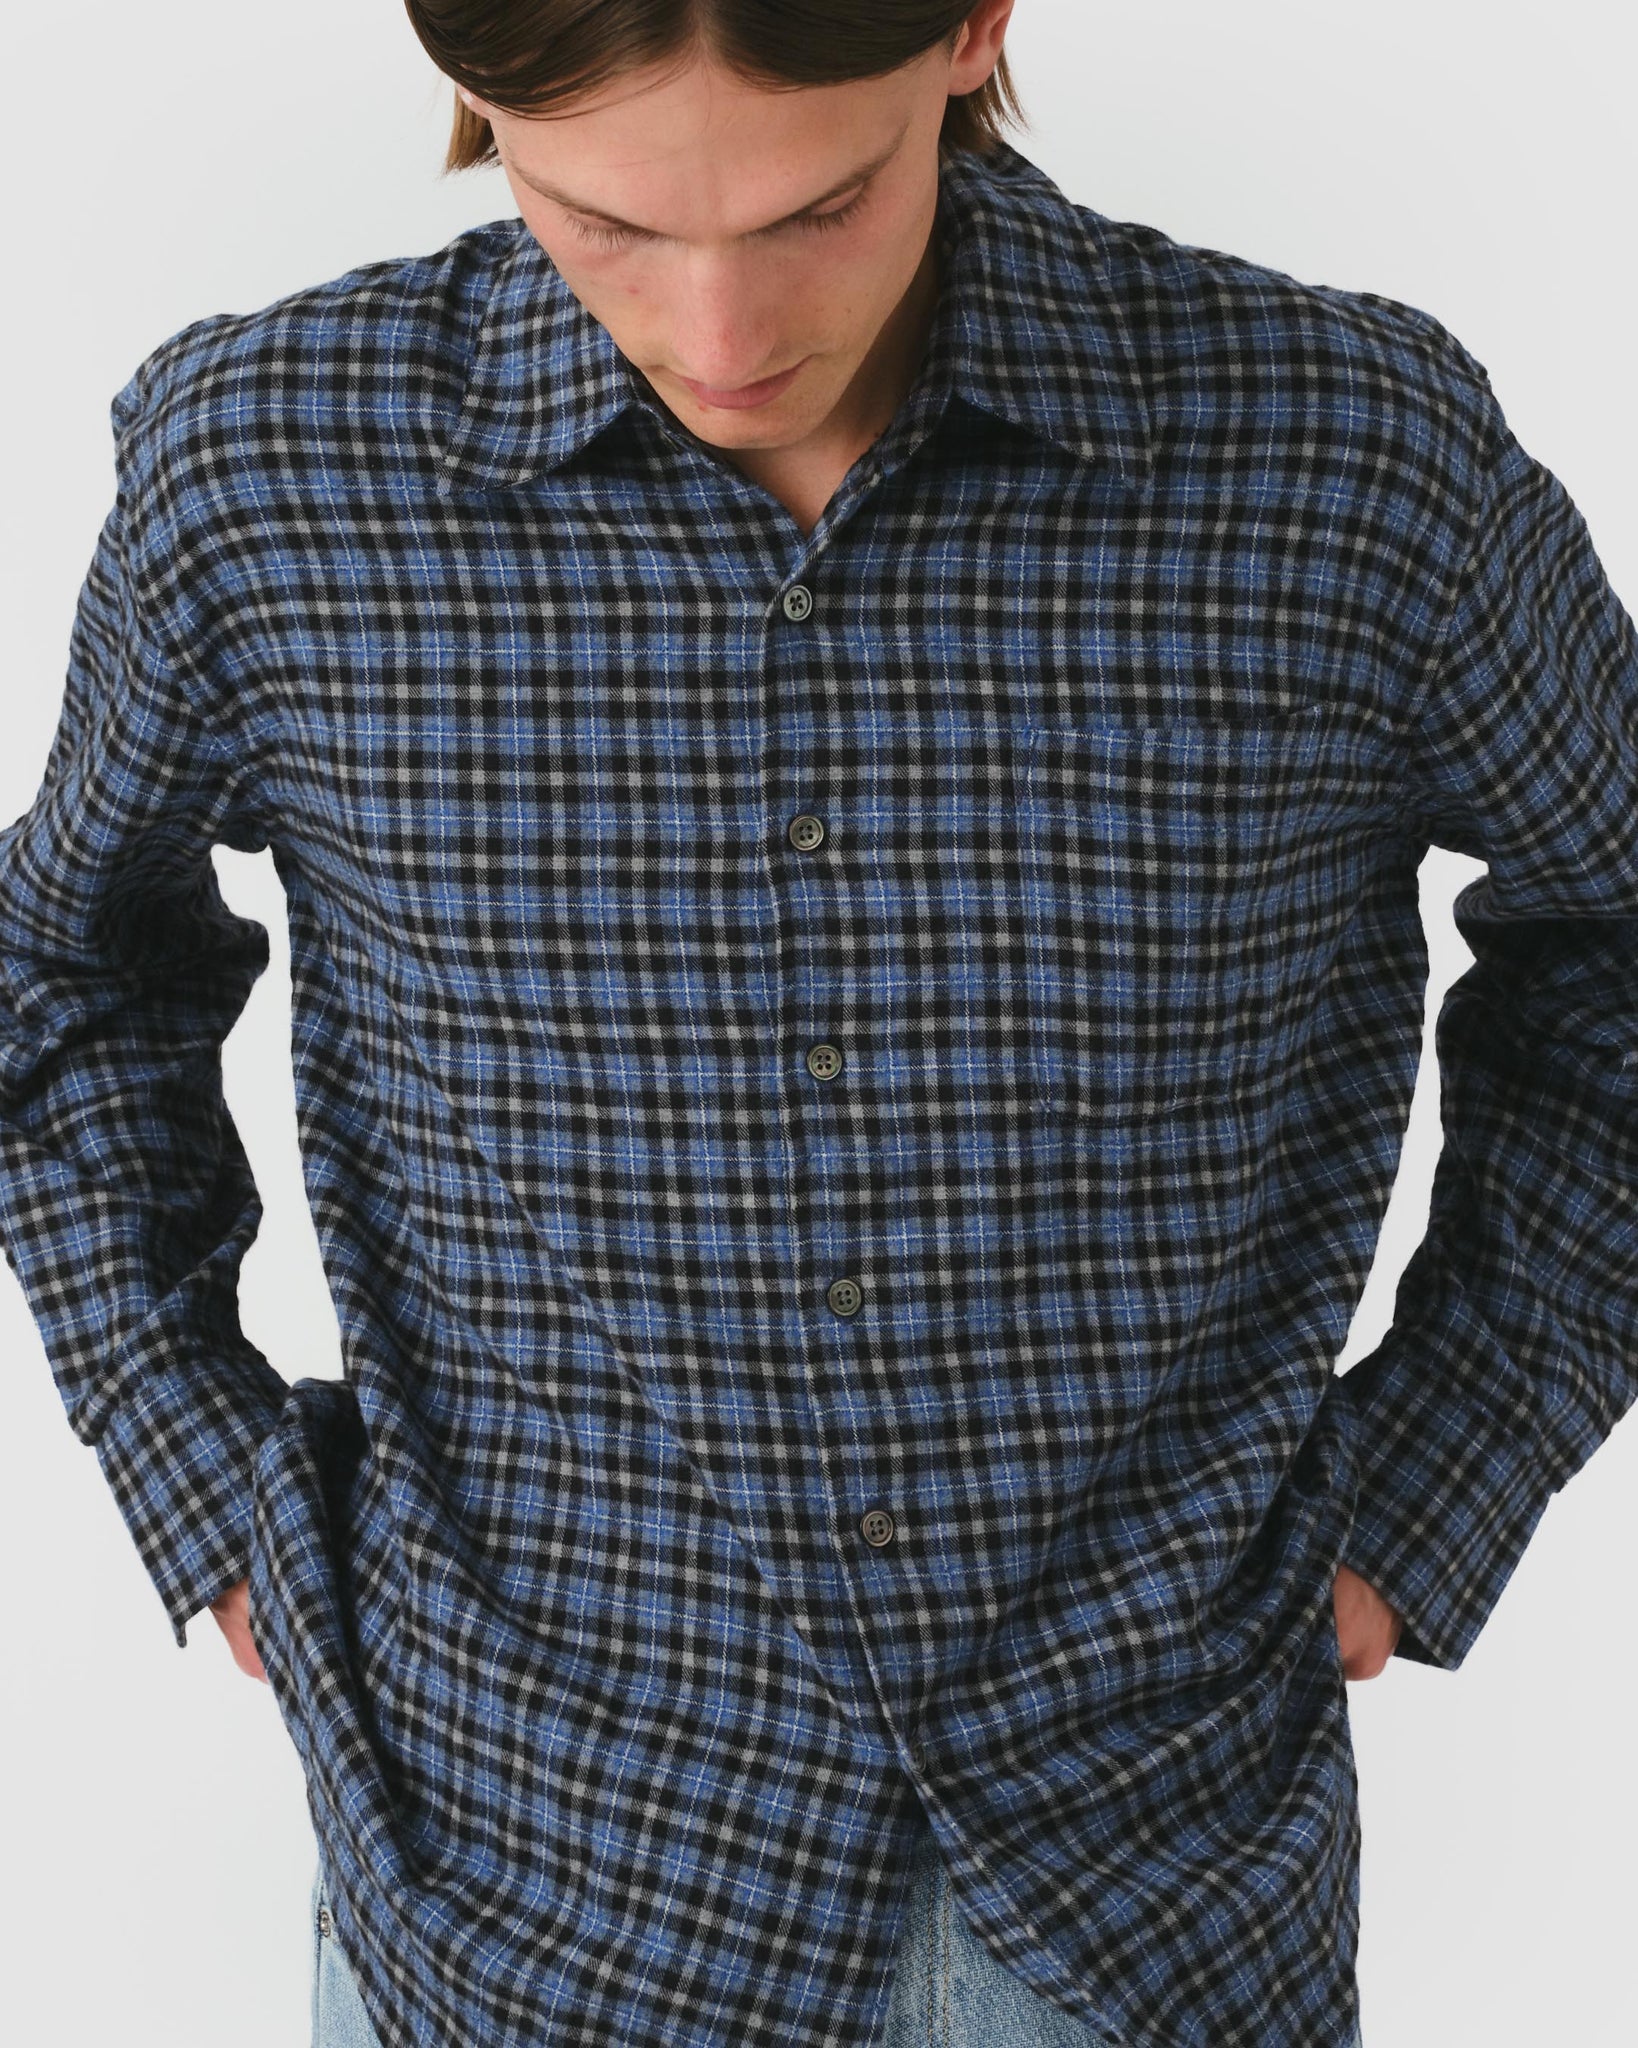 Above Shirt - Cantrell Check